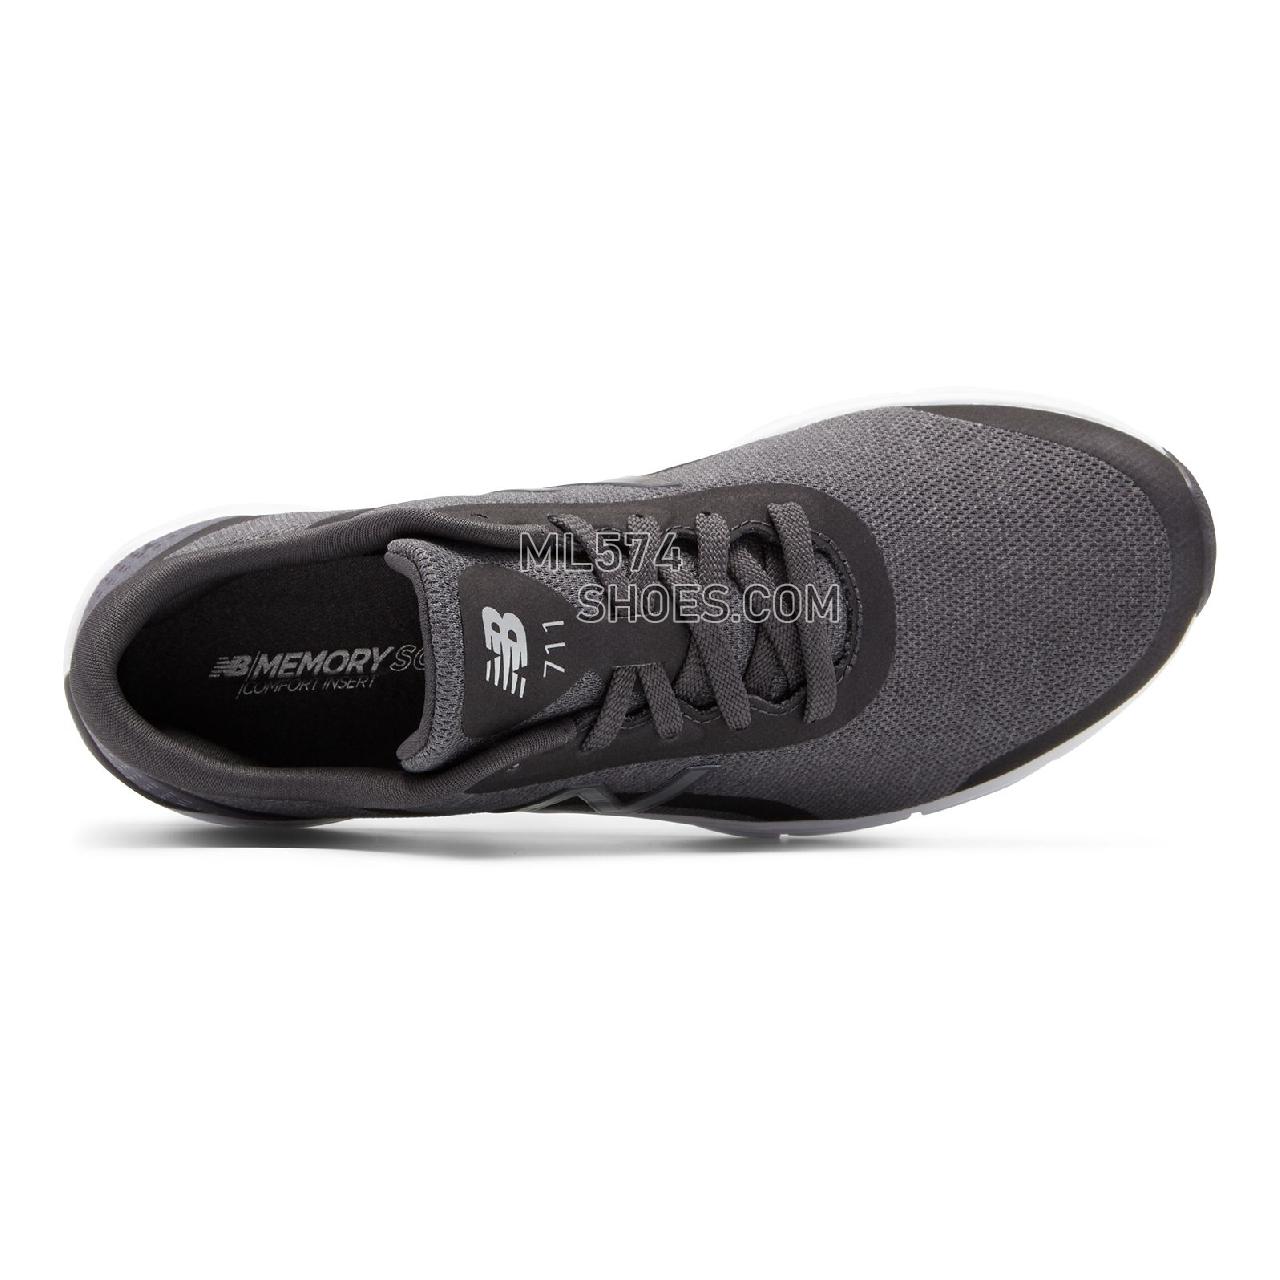 New Balance 711v3 Heathered Trainer - Women's 711 - X-training Charcoal with Silver - WX711CM3